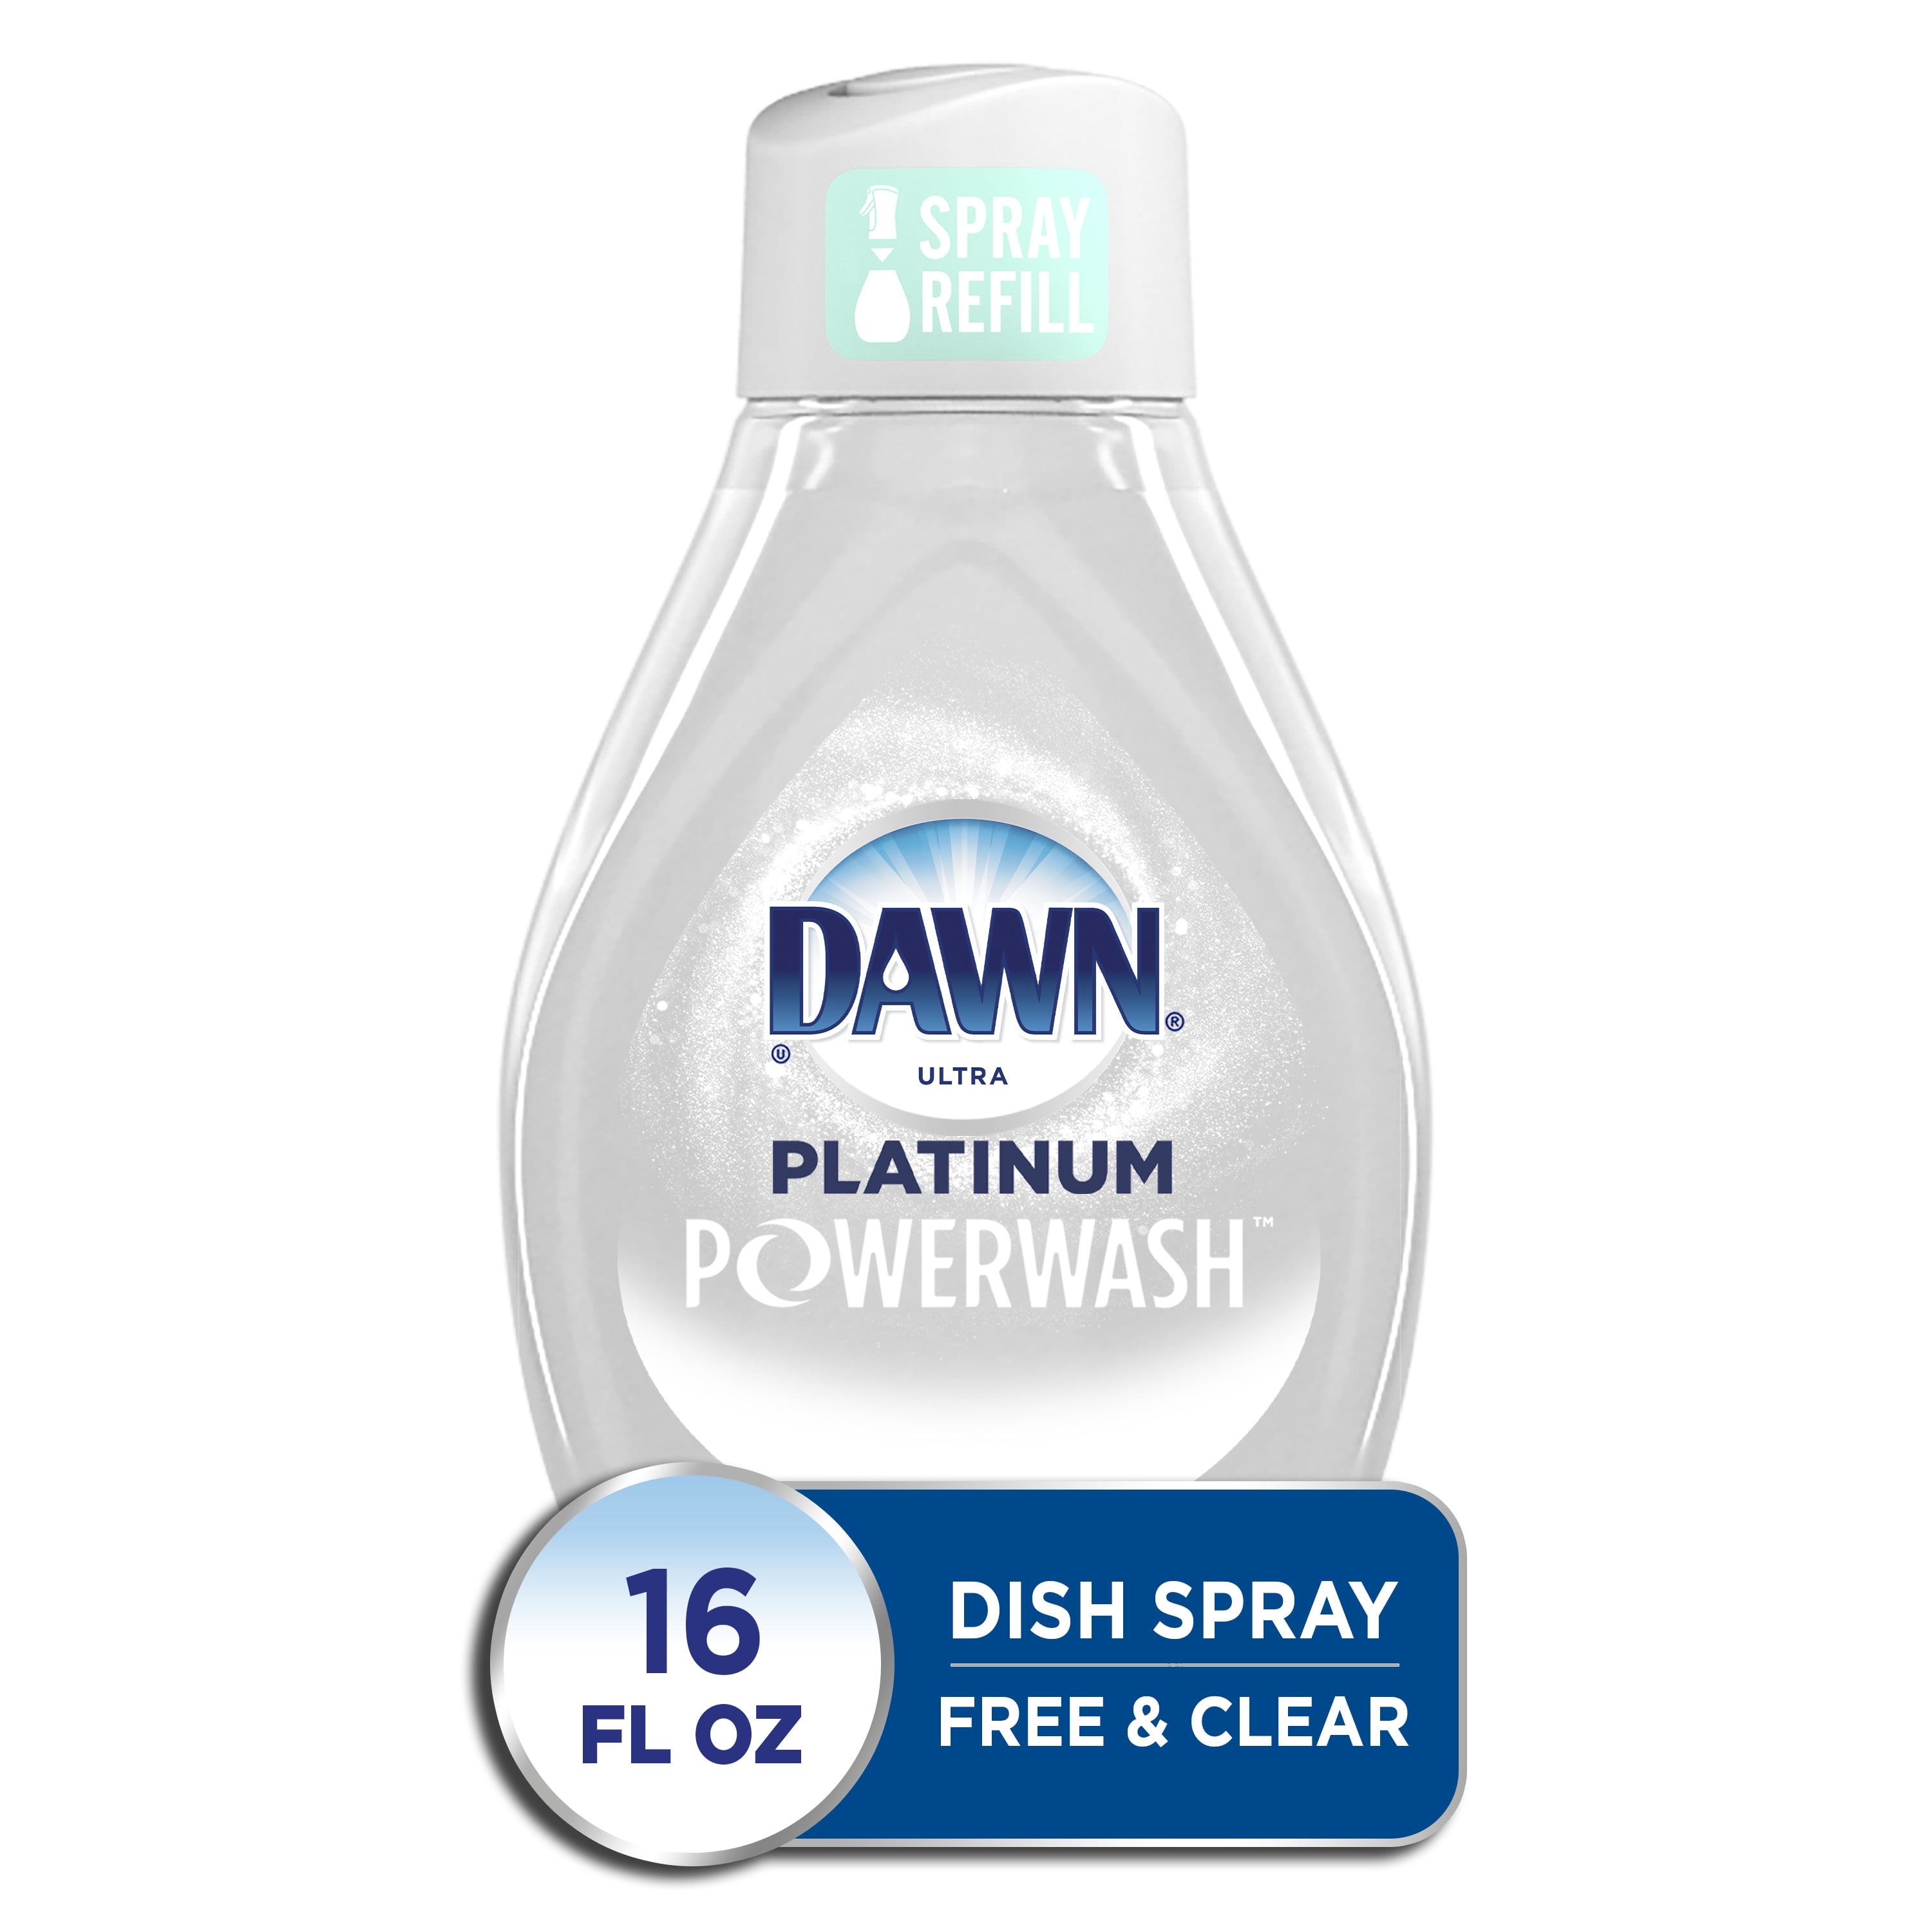 Can I use Dawn dish soap to clean my bike Don't use High pressure sprayers